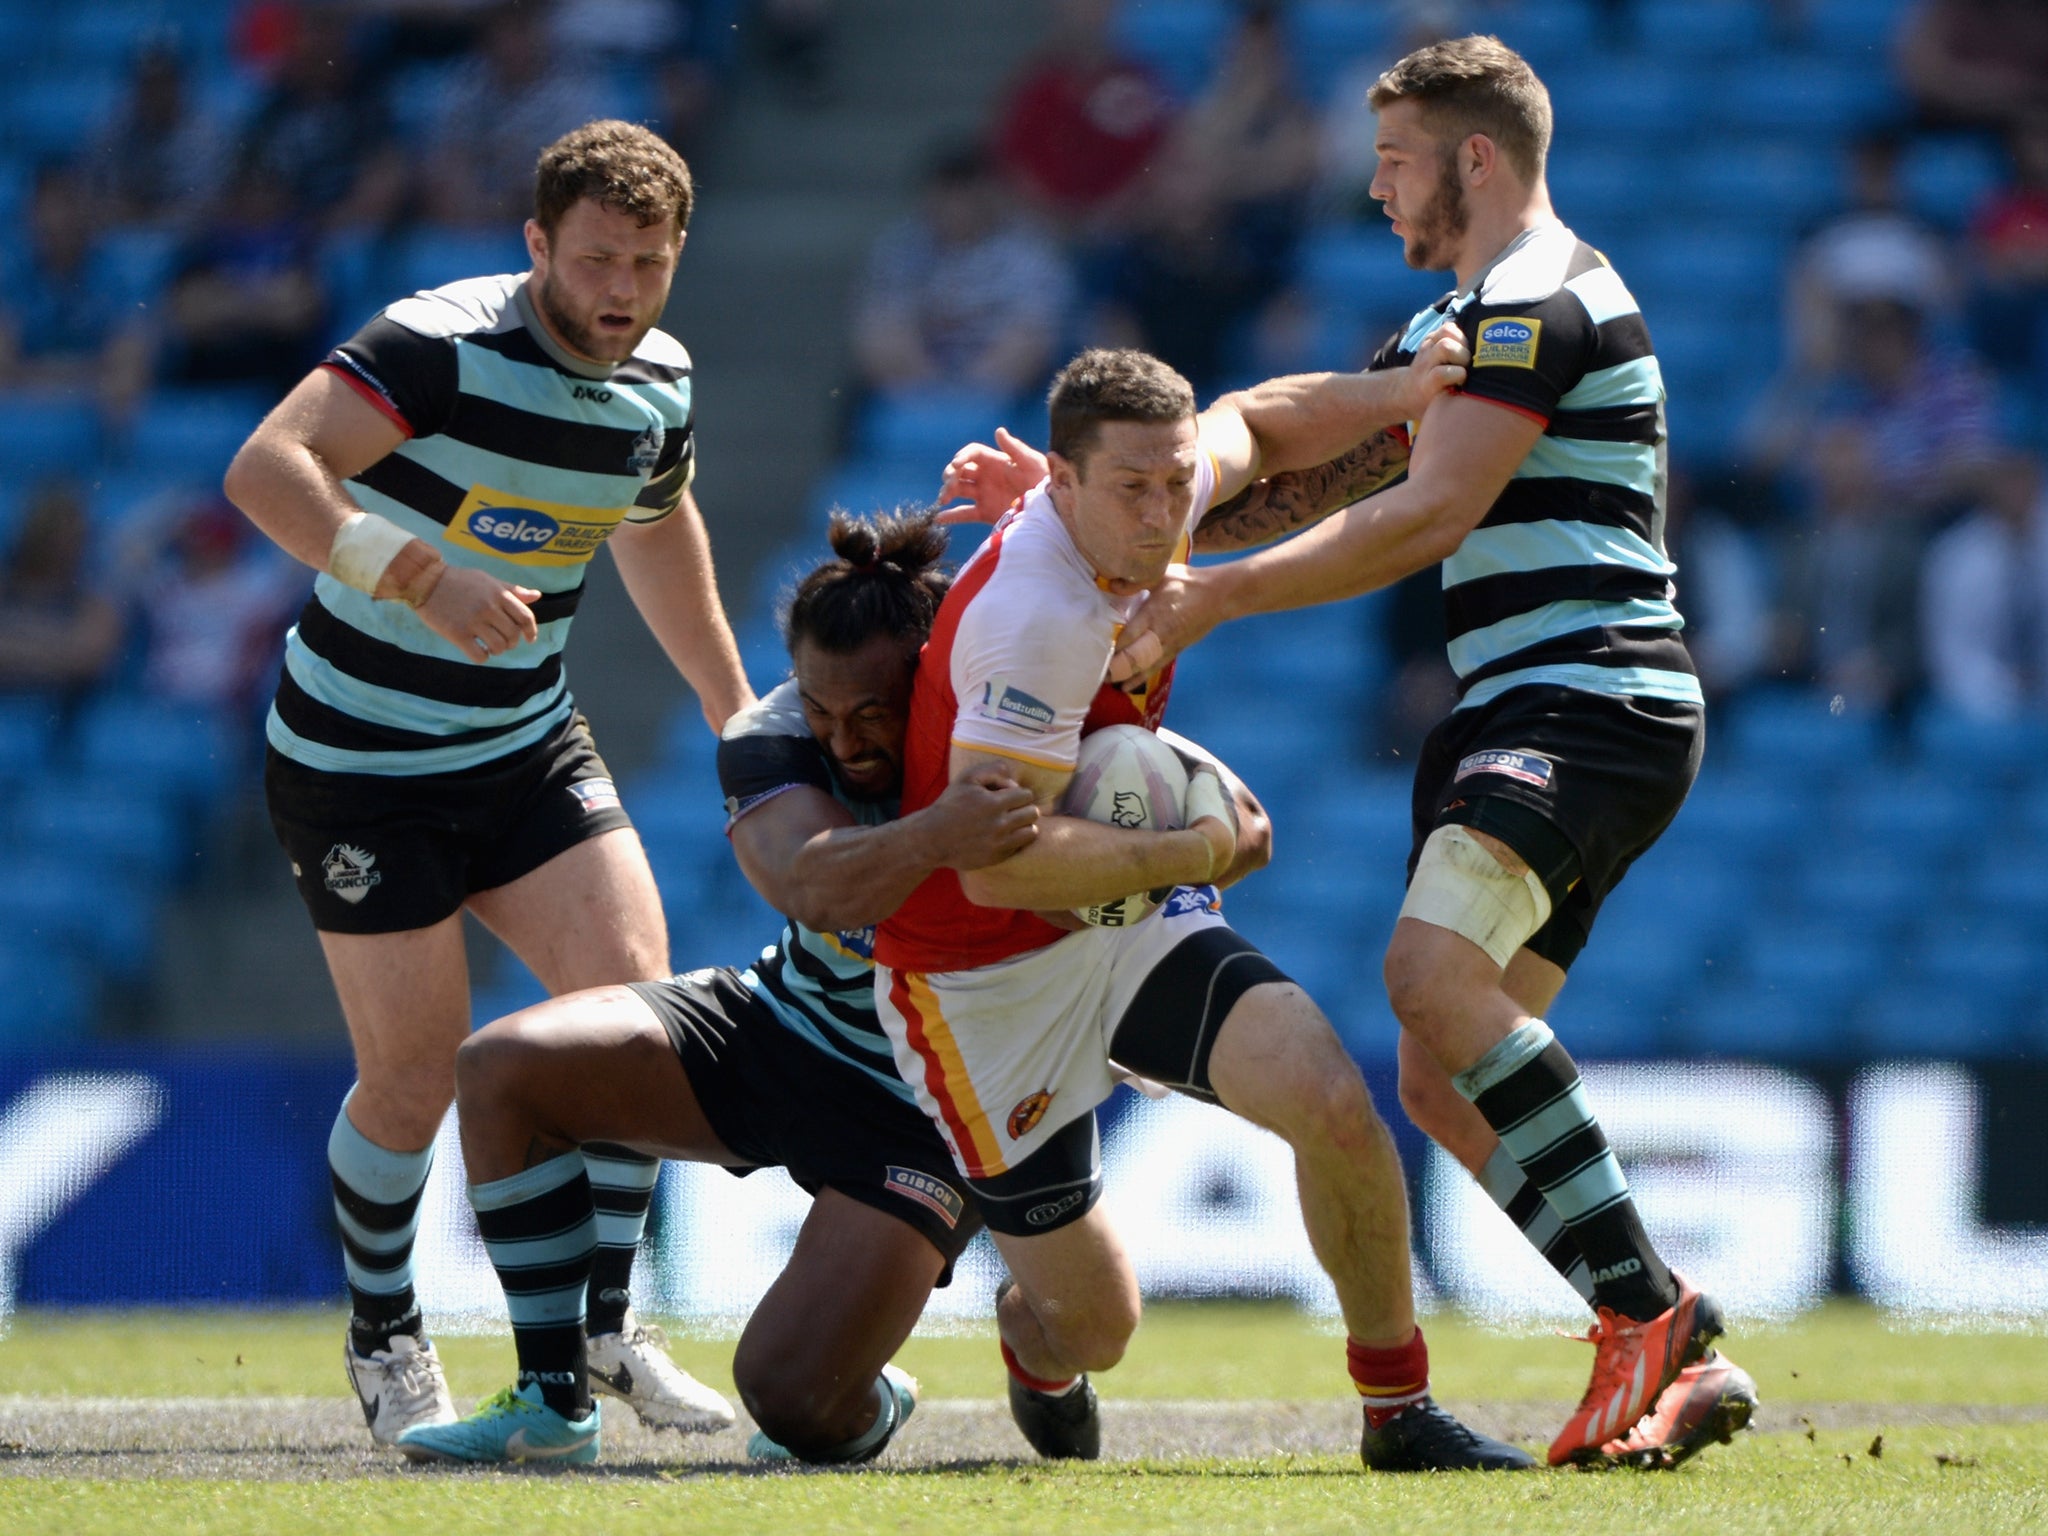 Ben Pomeroy of Catalan Dragons tries to break the london line during the Super League match between London Broncos and Catalan Dragons at Etihad Stadium